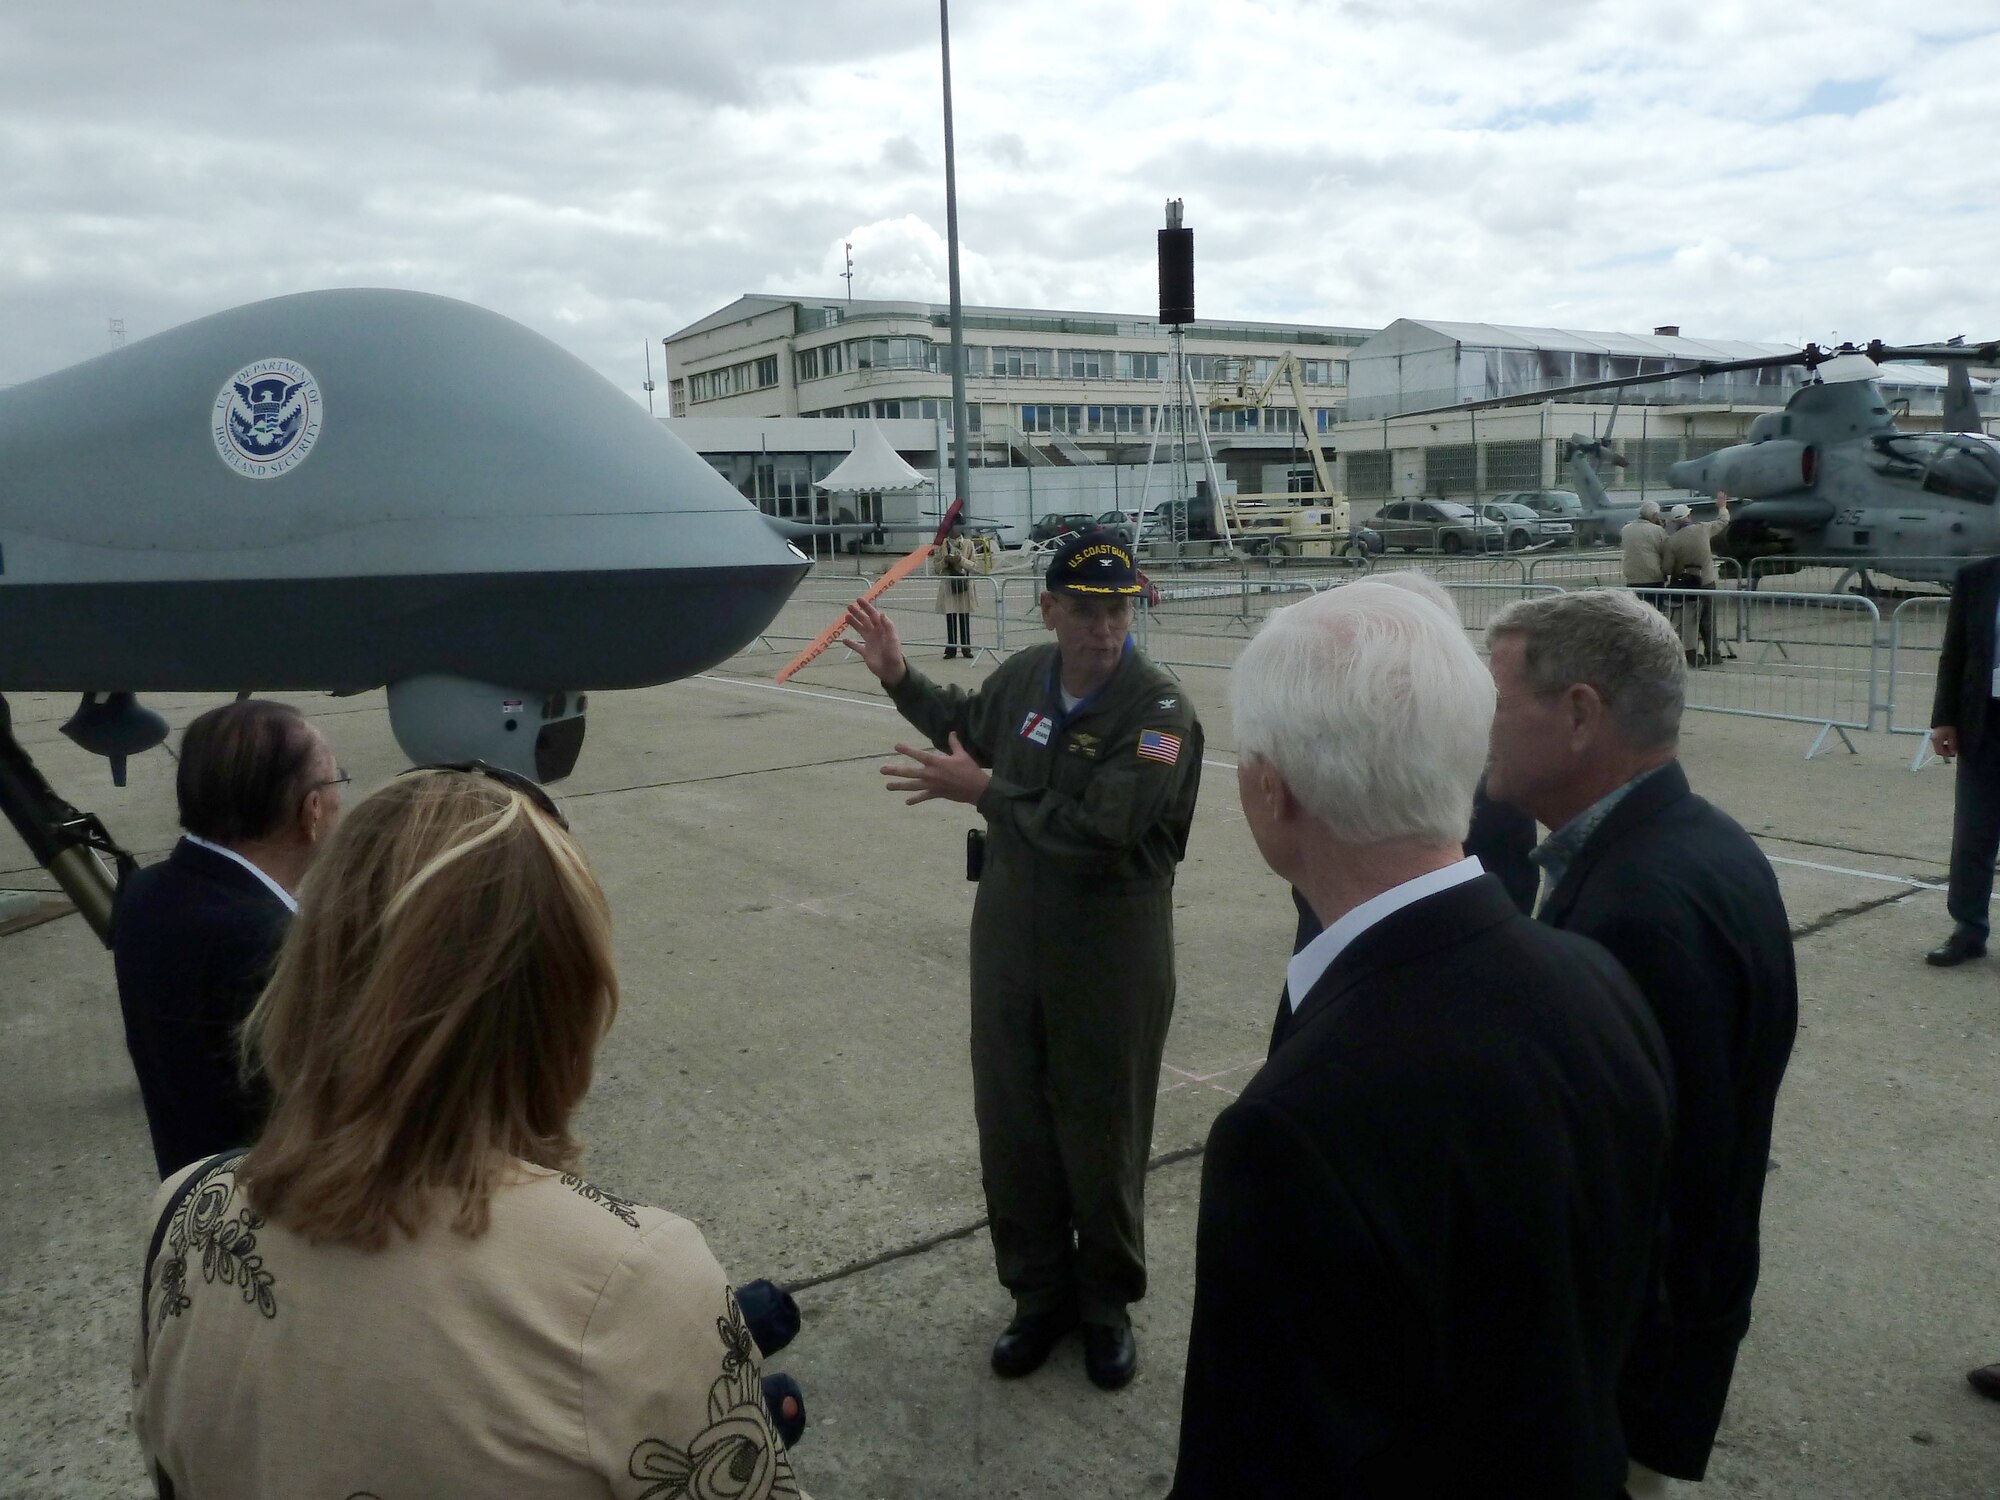 U.S. Coast Guard Capt. James Sommer explains the role of the MQ-9 Predator B (Guardian) unmanned aerial system to a Congressional Delegation at the 49th International Pars Air Show, Le Bourget Airport , France. The MQ-9 is operated by the U.S. Customs and Border Protection and the U.S. Coast Guard for the Department of Homeland Security, and is making its first appearance at the Paris Air Show. (U.S. Air Force photo/Tech. Sgt. Francesca Popp)